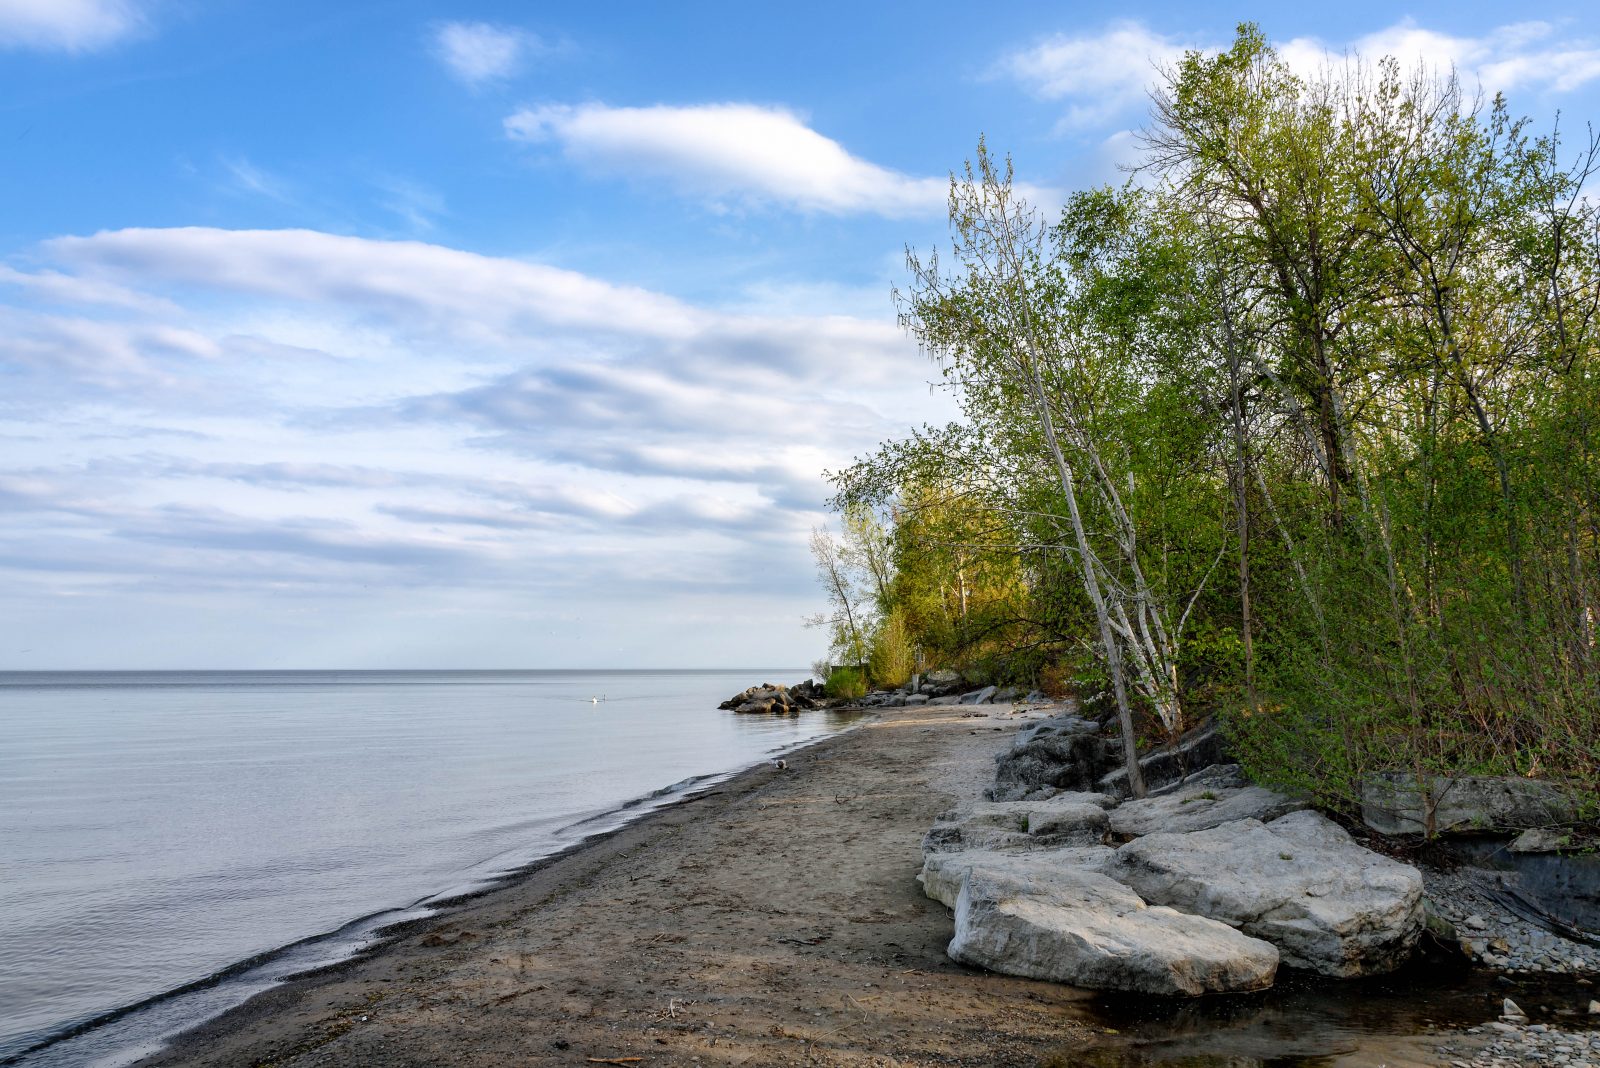 A sandy shore with rocks and trees. The water along the shore is still.